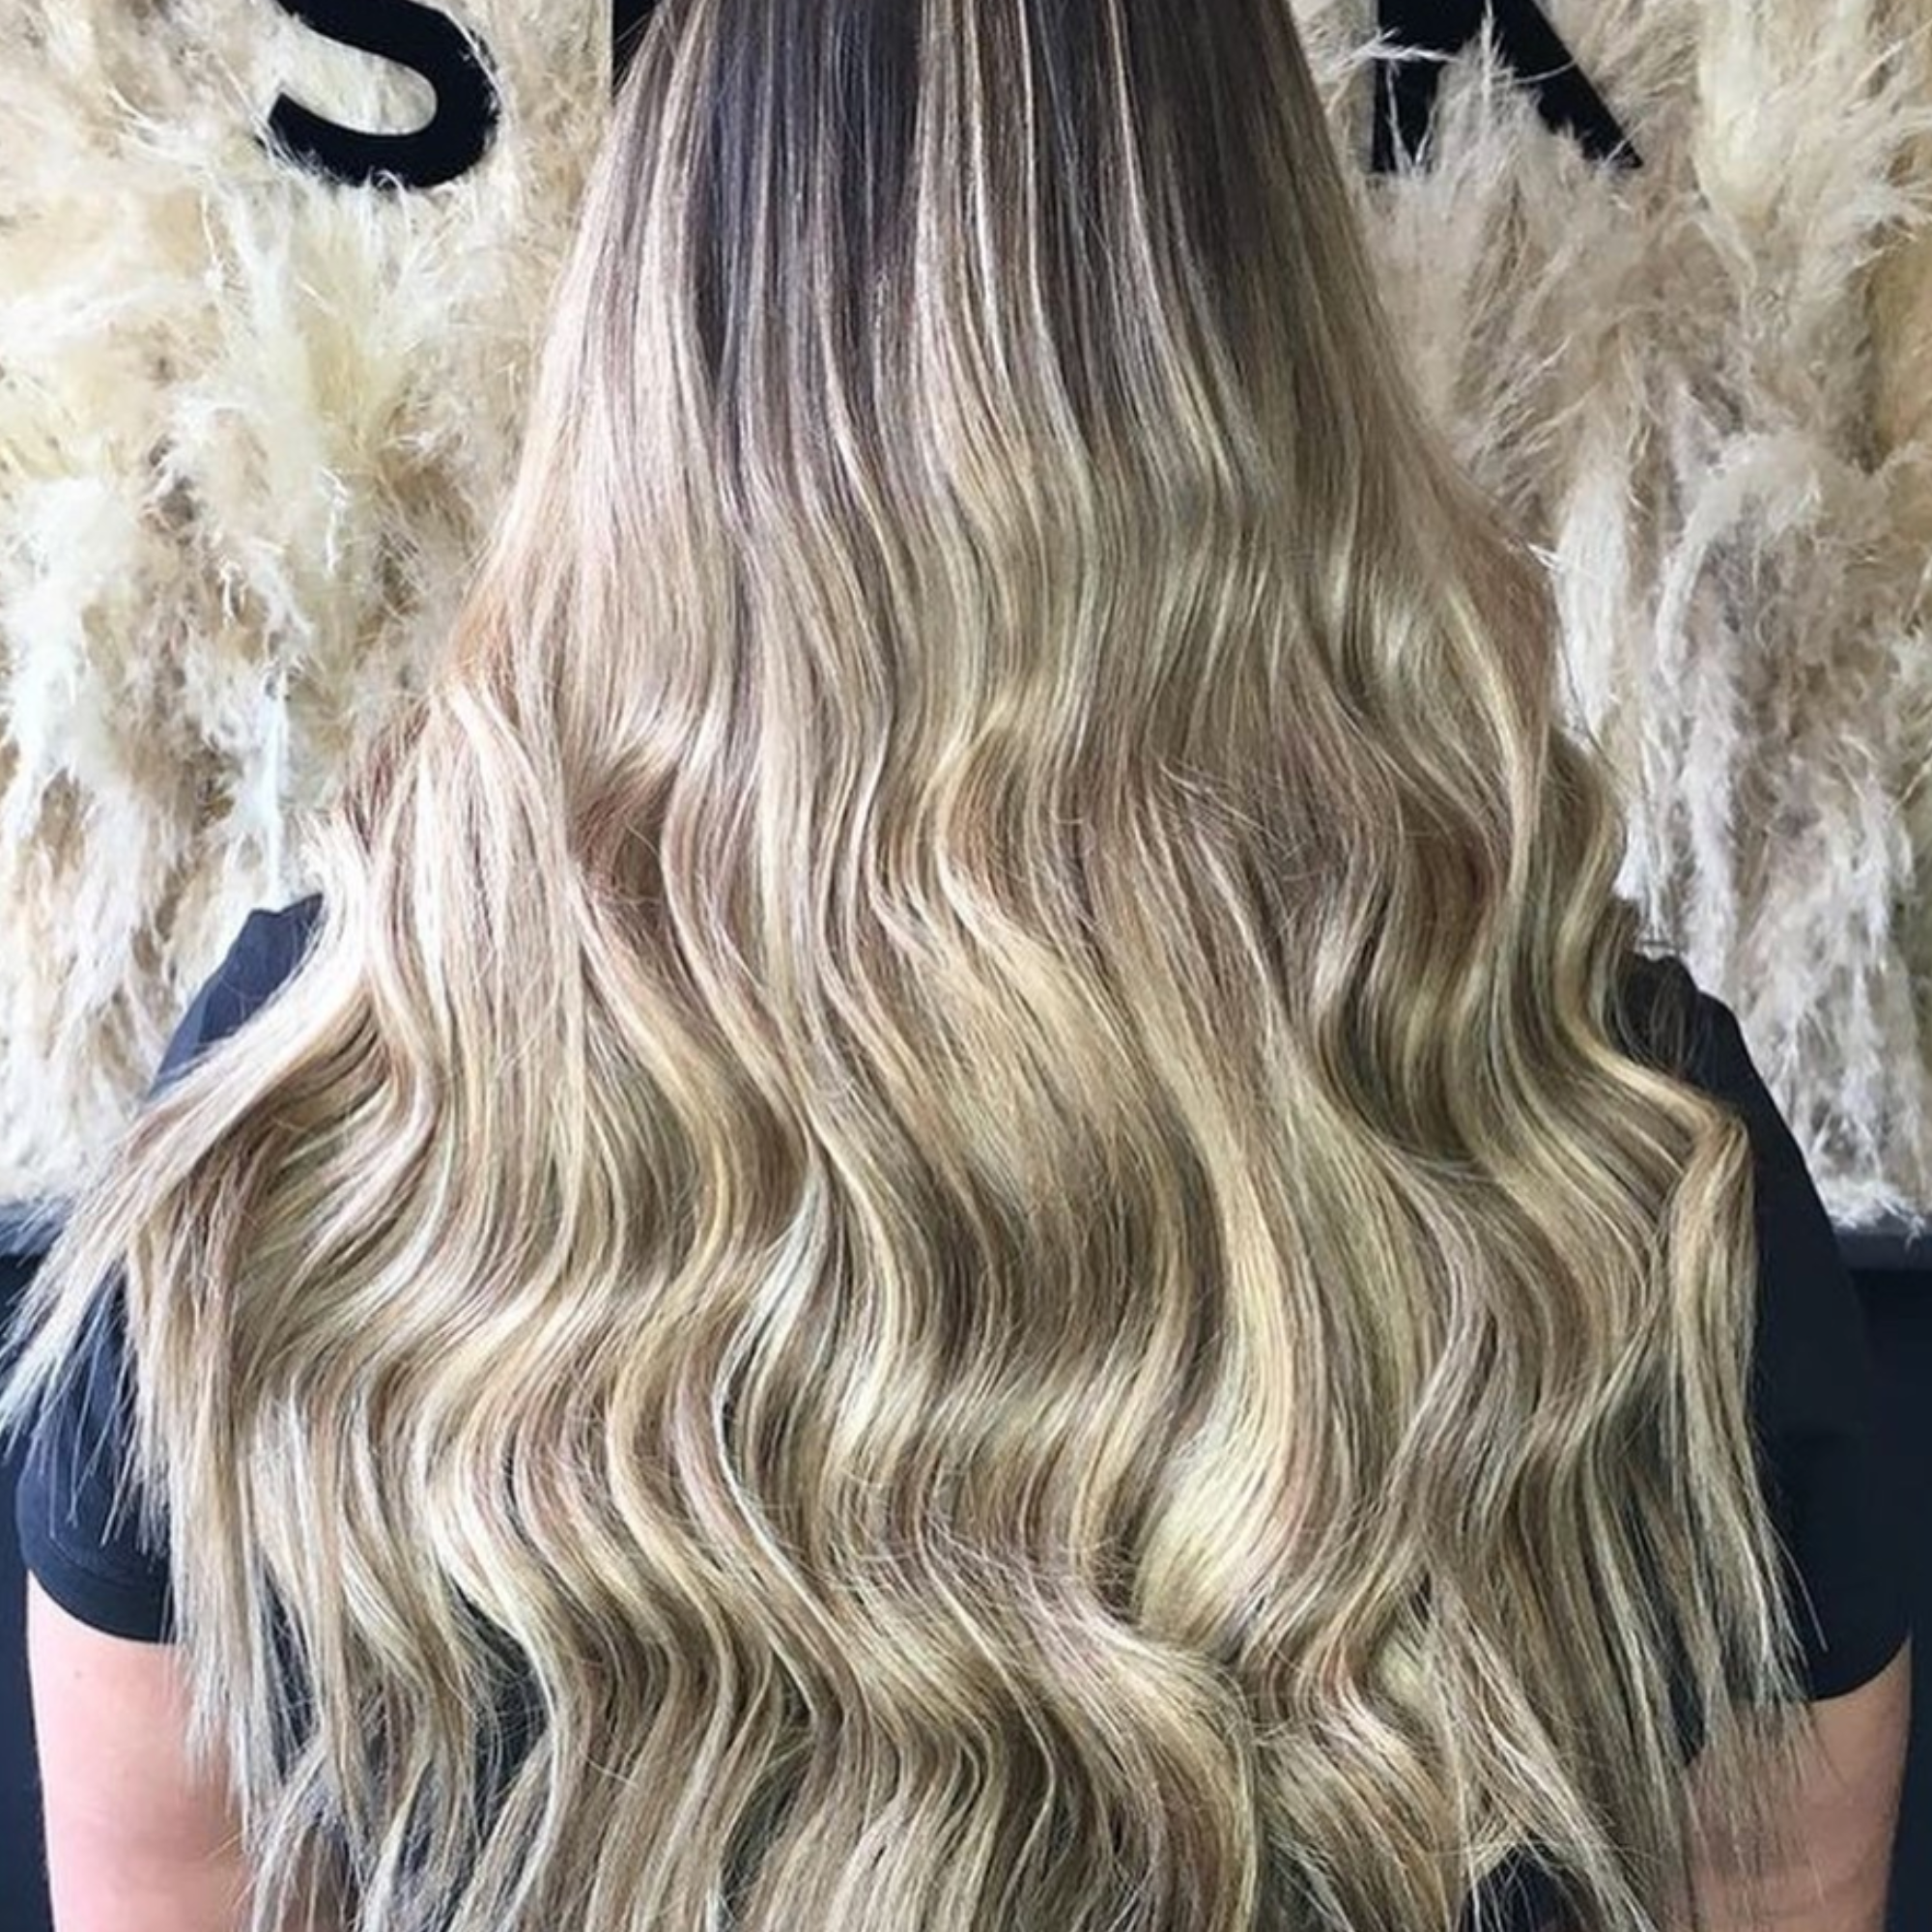 22" Invisible Tape Extensions Rooted Coachella